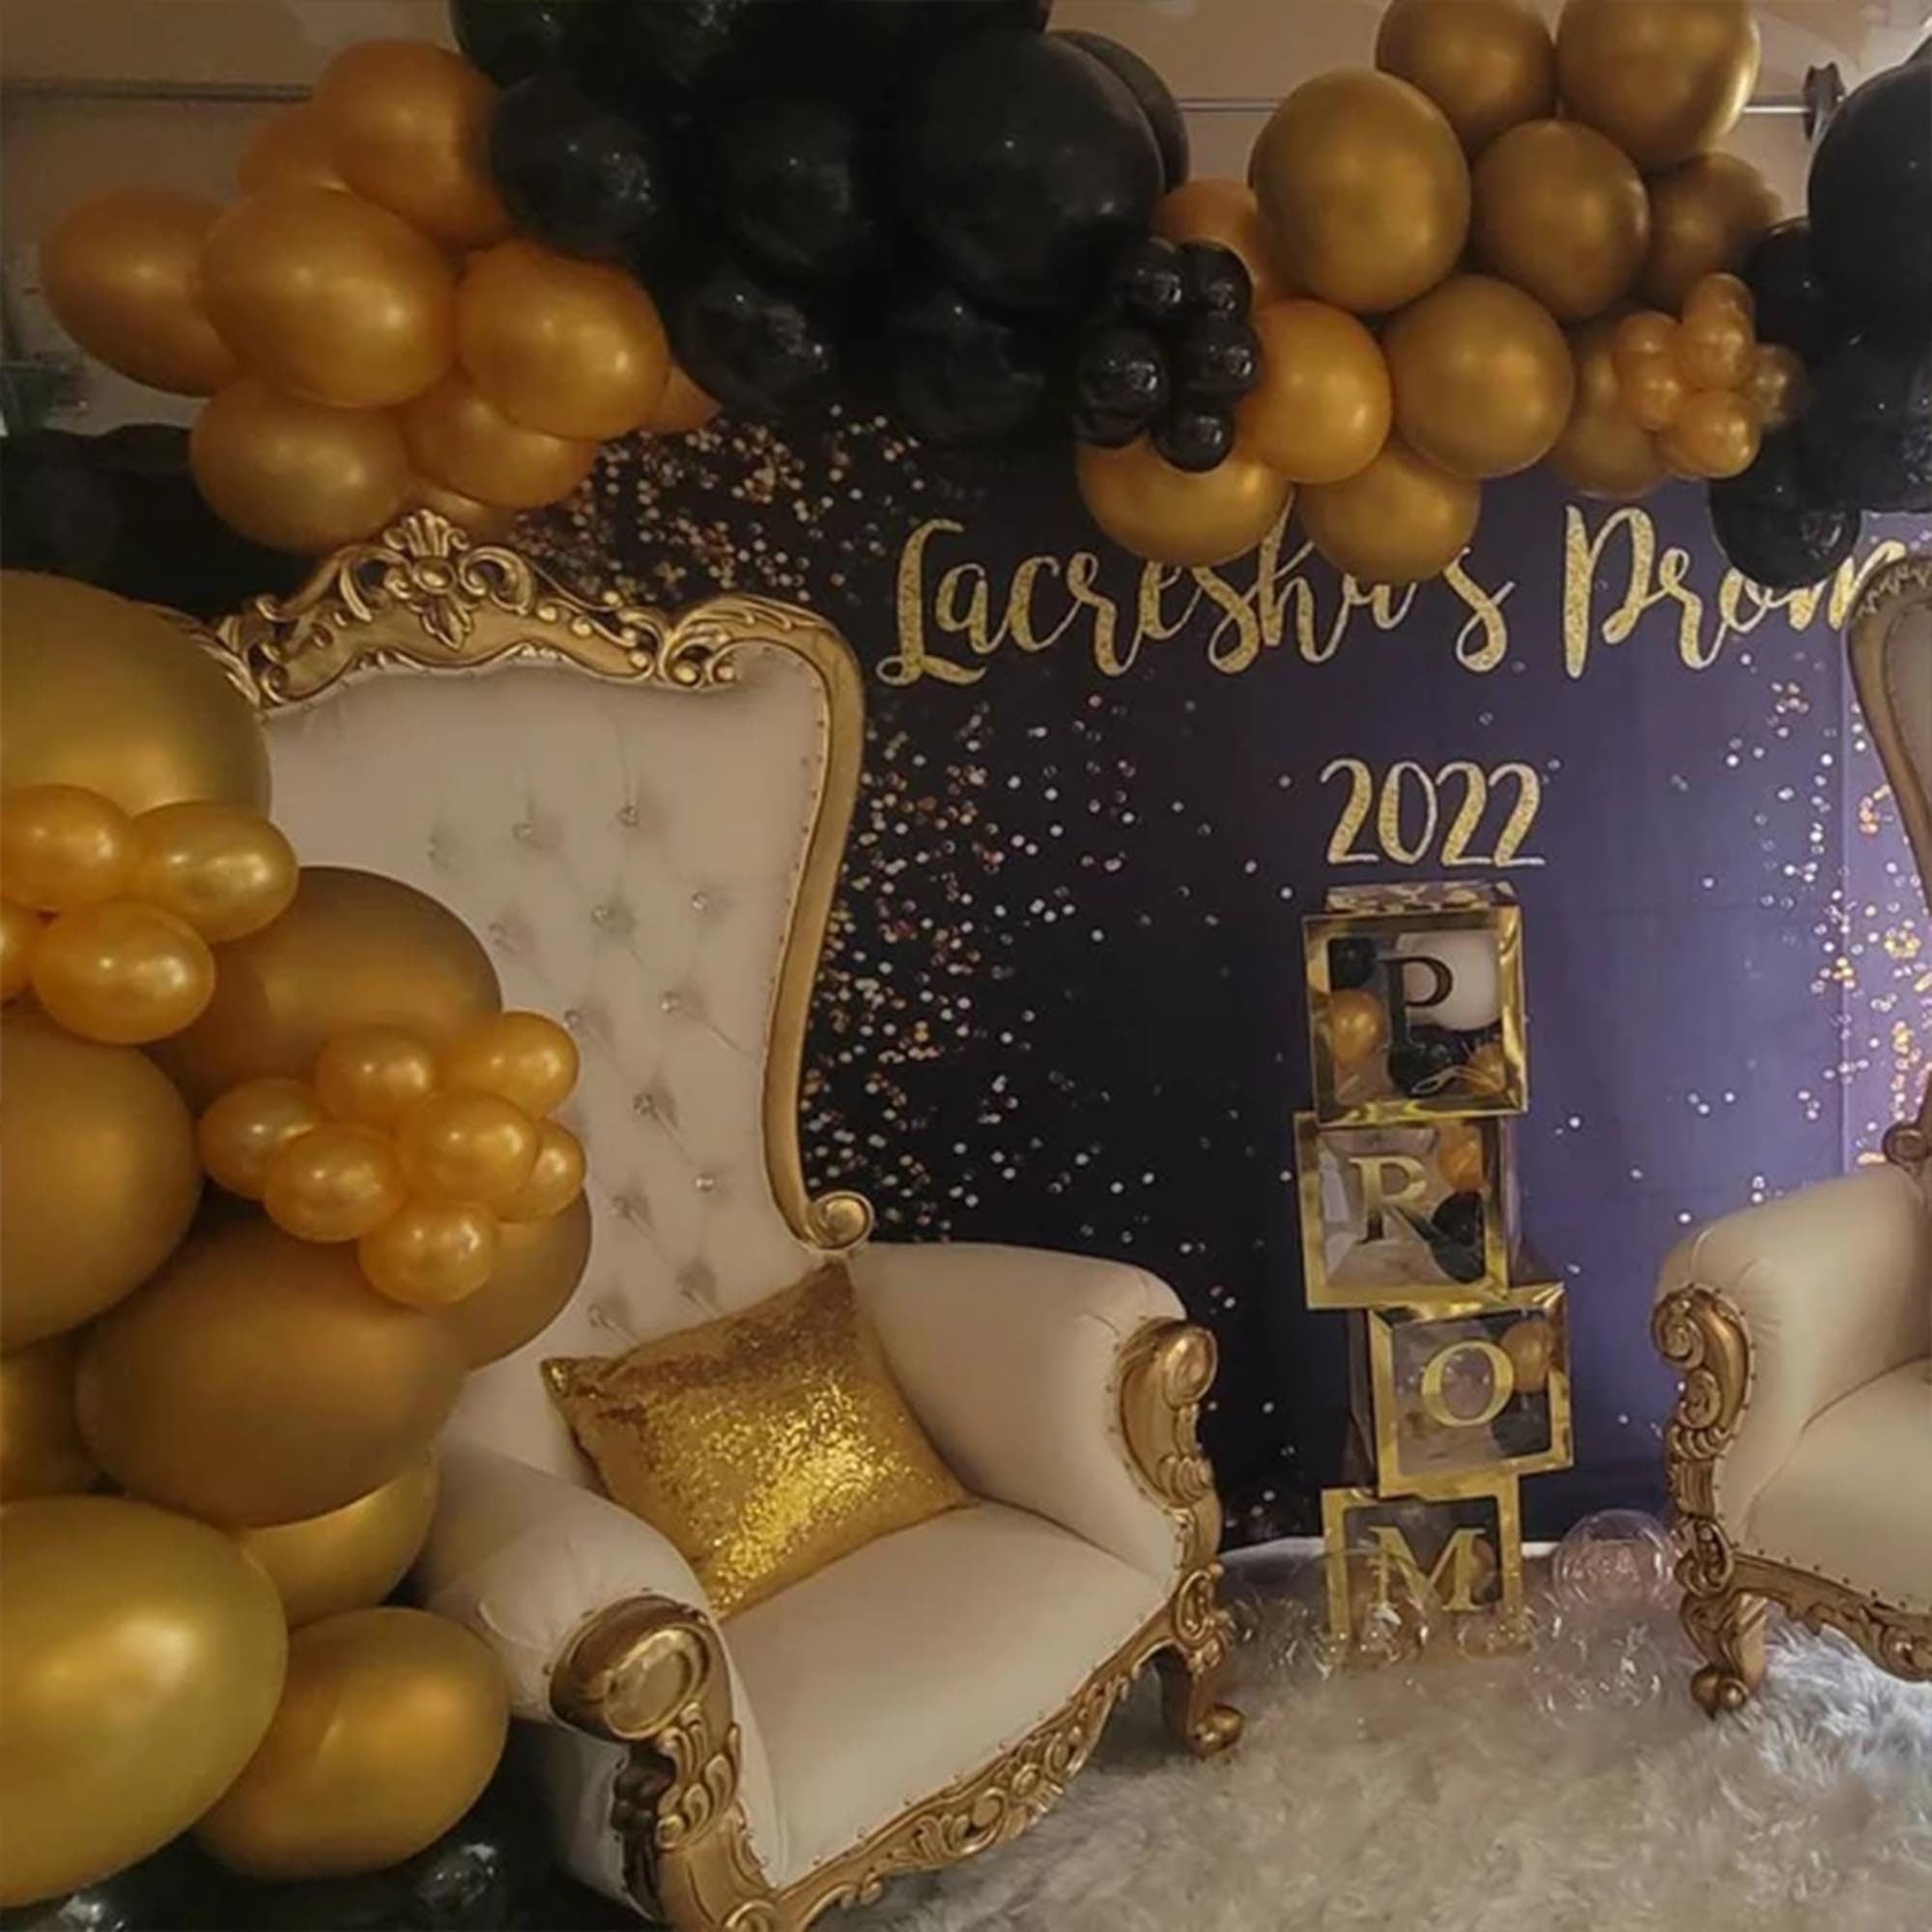 Personalized Prom Backdrop - Black and Gold